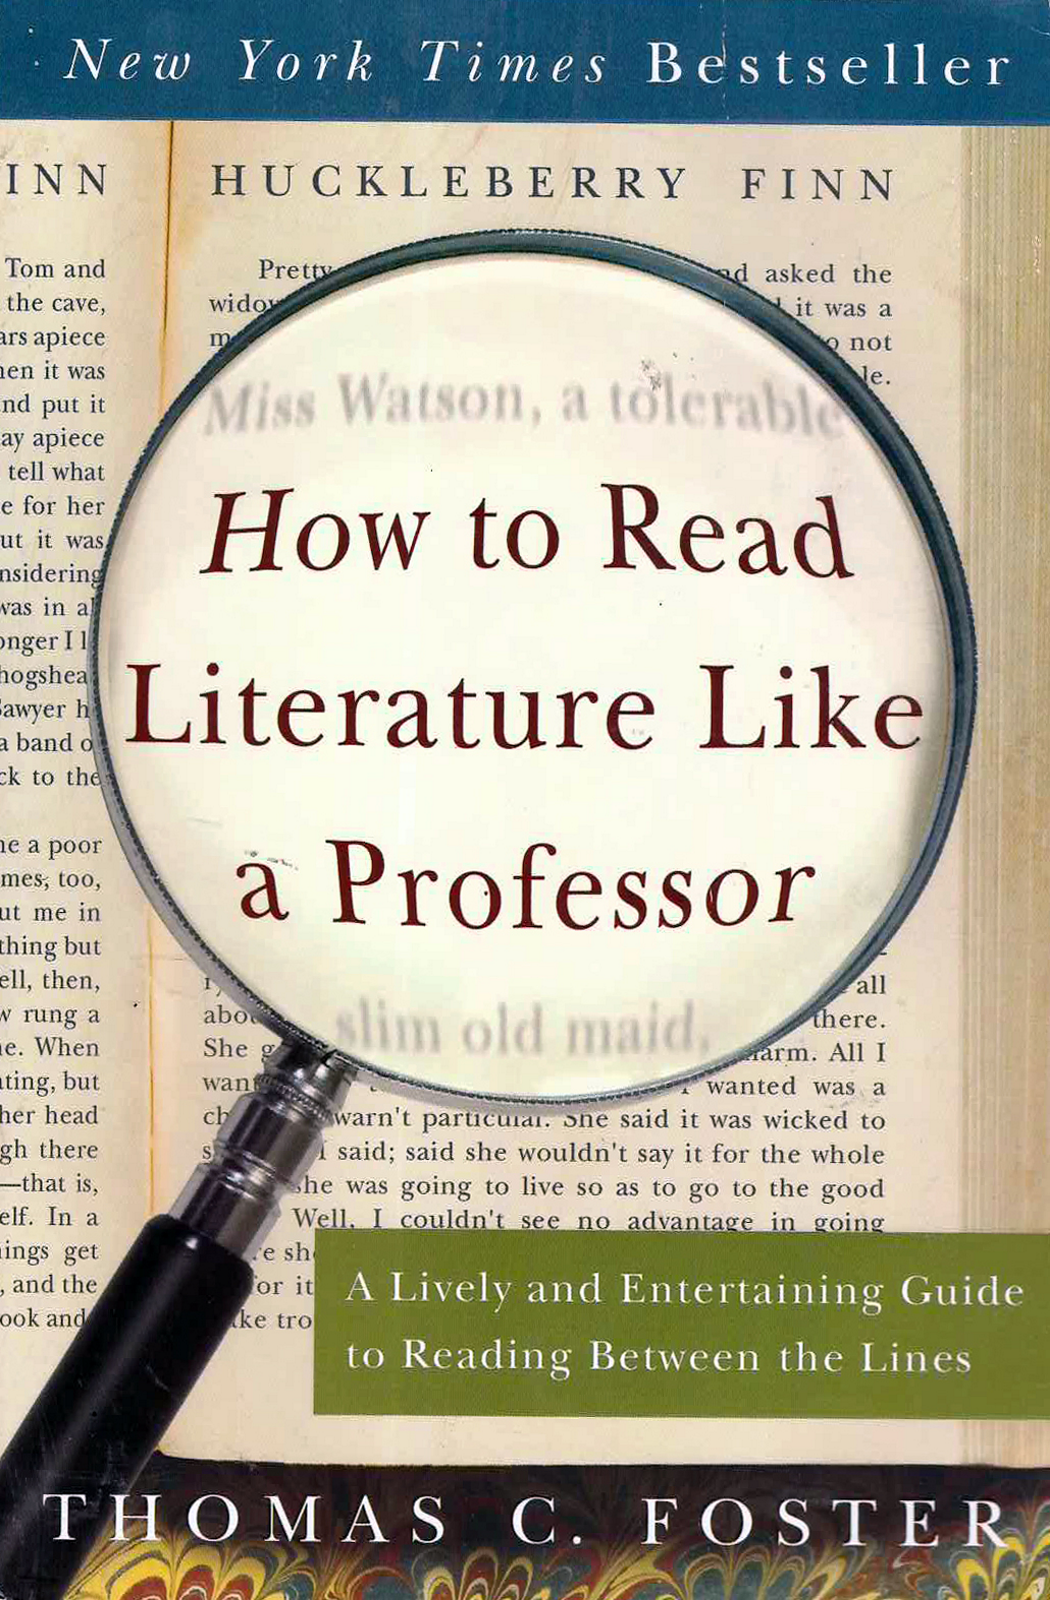 How To Read Literature Like A Professor - Thomas C. Foster